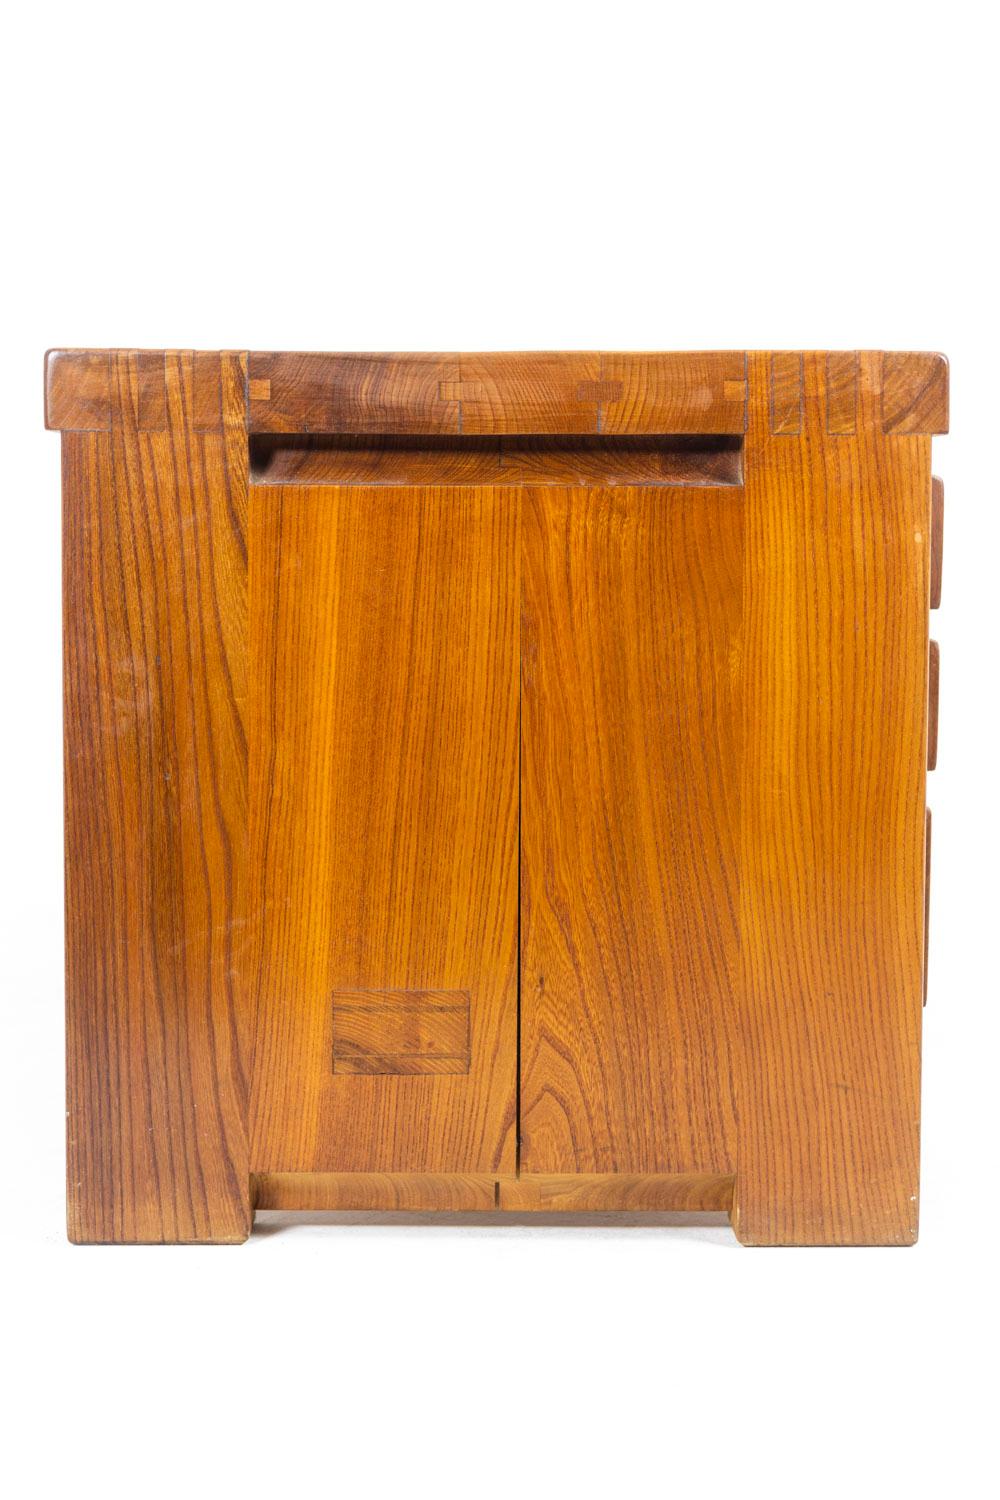 Pierre Chapo, Low Cabinet in Natural Elm, 1976 4